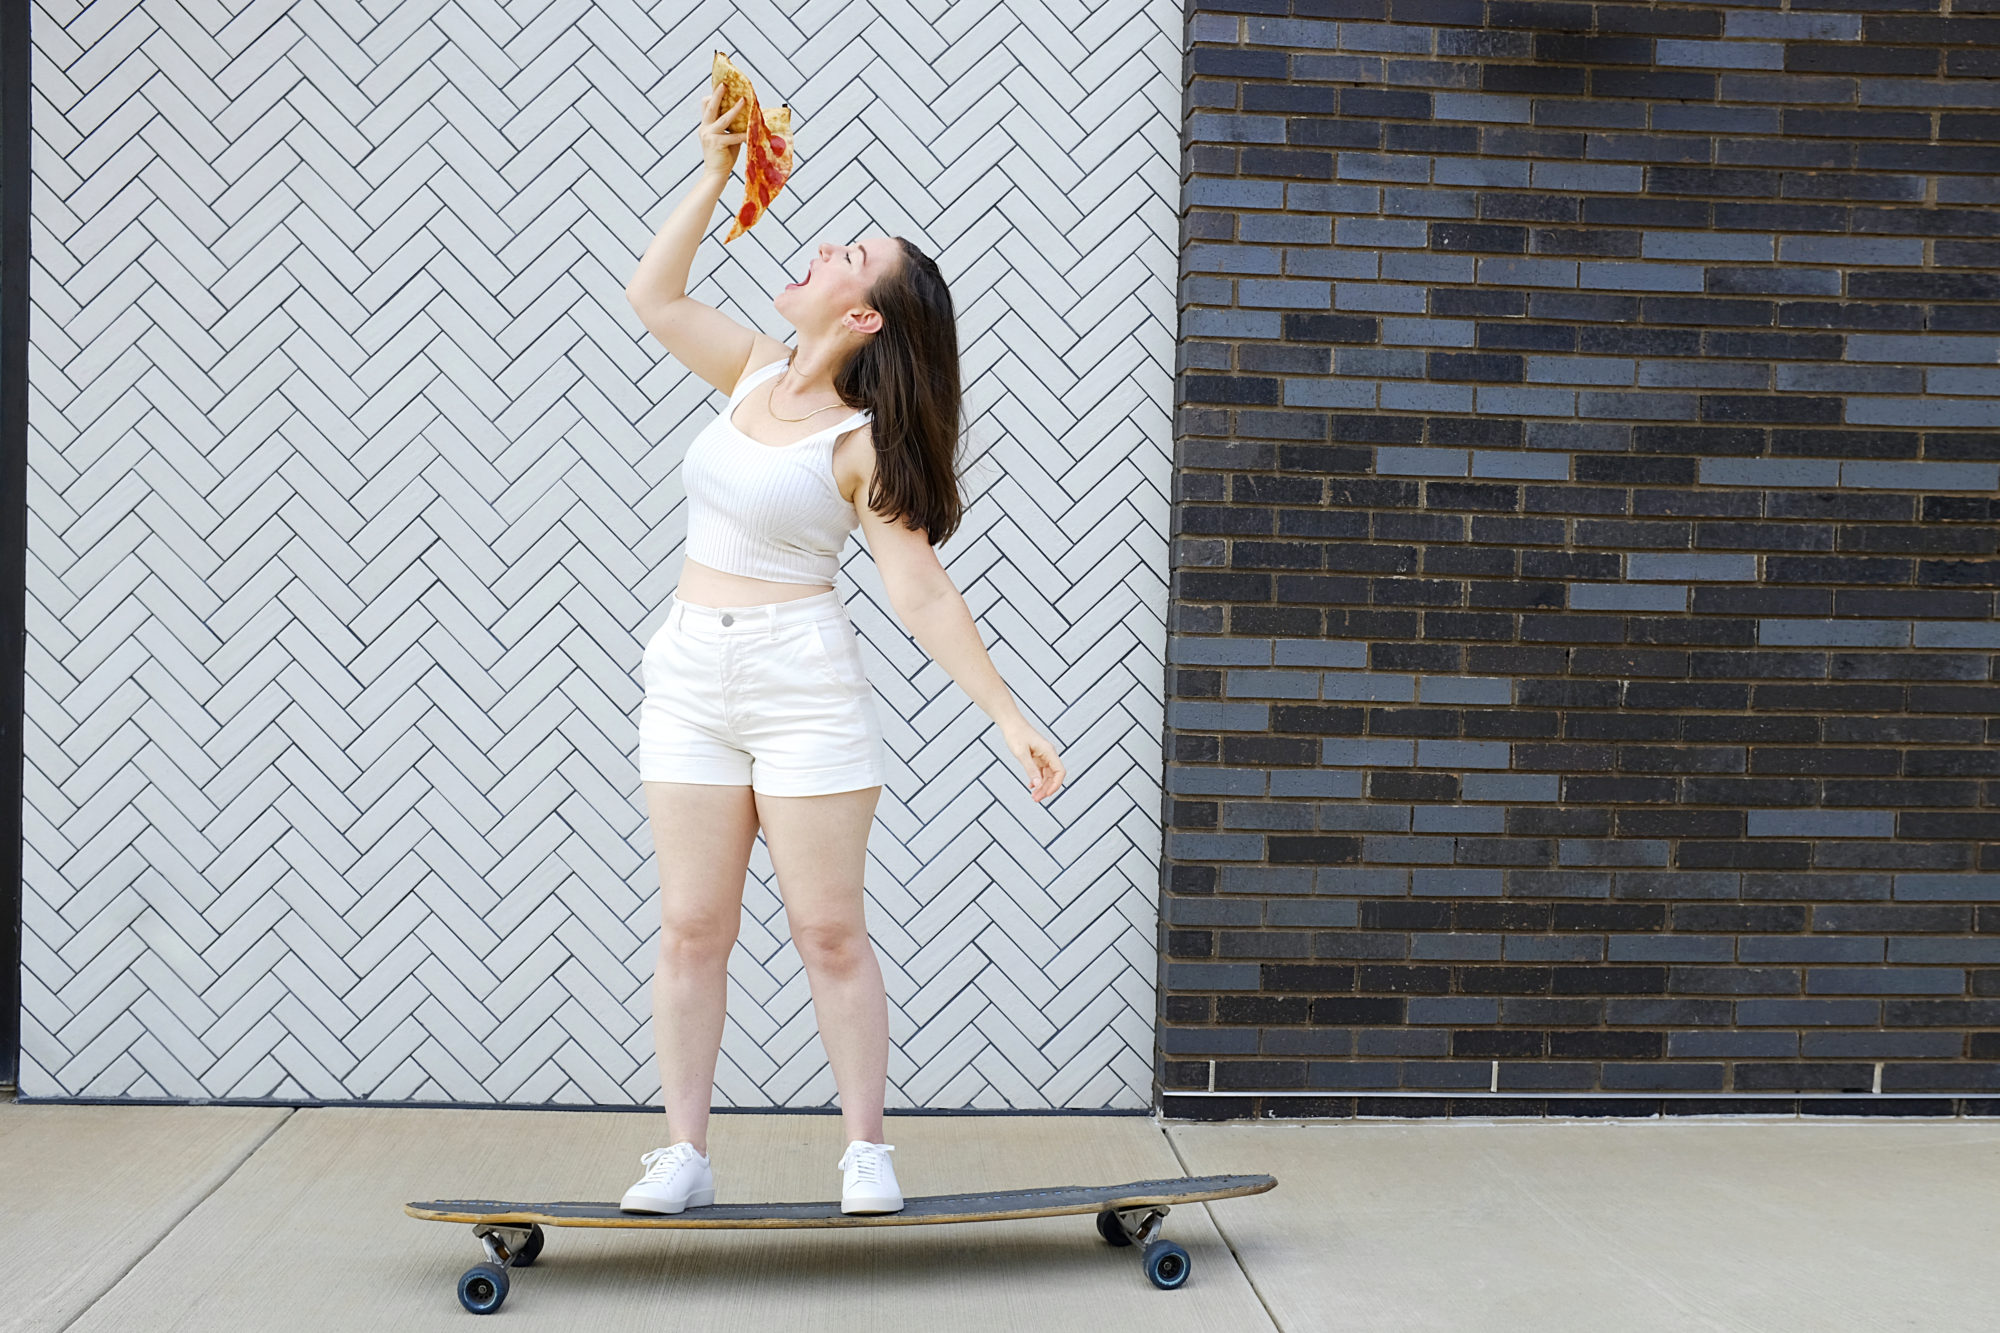 Alyssa skateboards while holding pizza